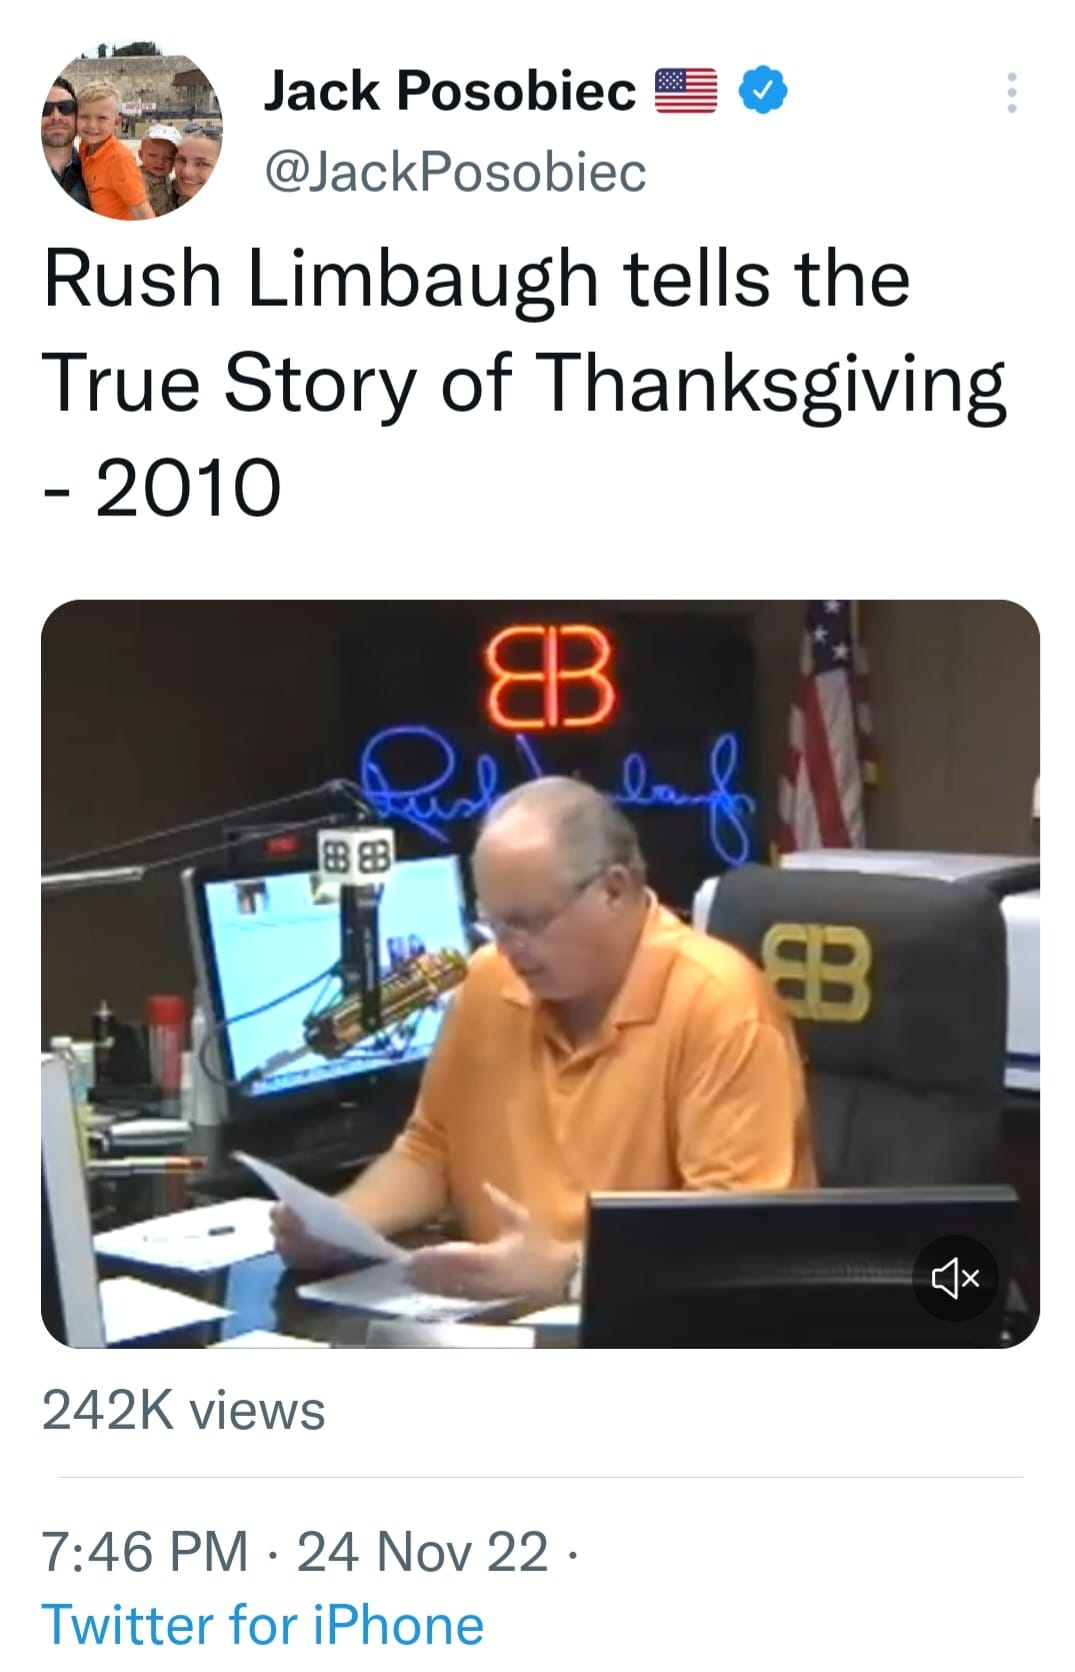 May be an image of 3 people and text that says 'Jack Posobiec @JackPosobiec Rush Limbaugh tells the True Story of Thanksgiving -2010 EB 88 8B 242K views 7:46 PM 24 Nov 22 Twitter for iPhone'